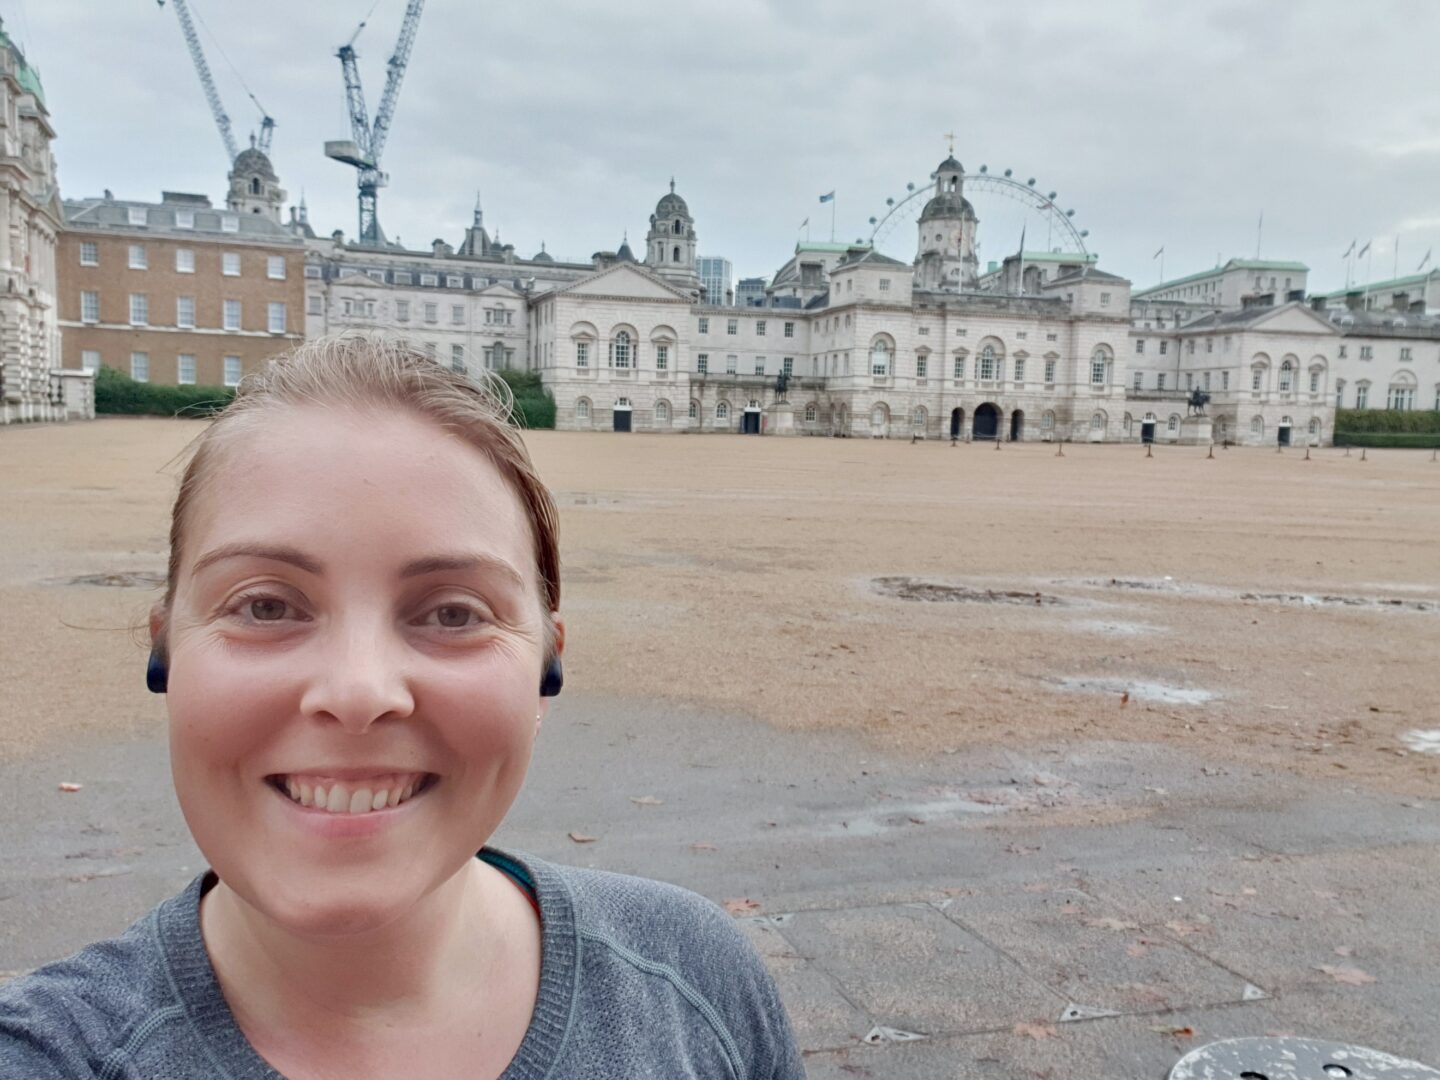 Selfie in front of Horse Guards 